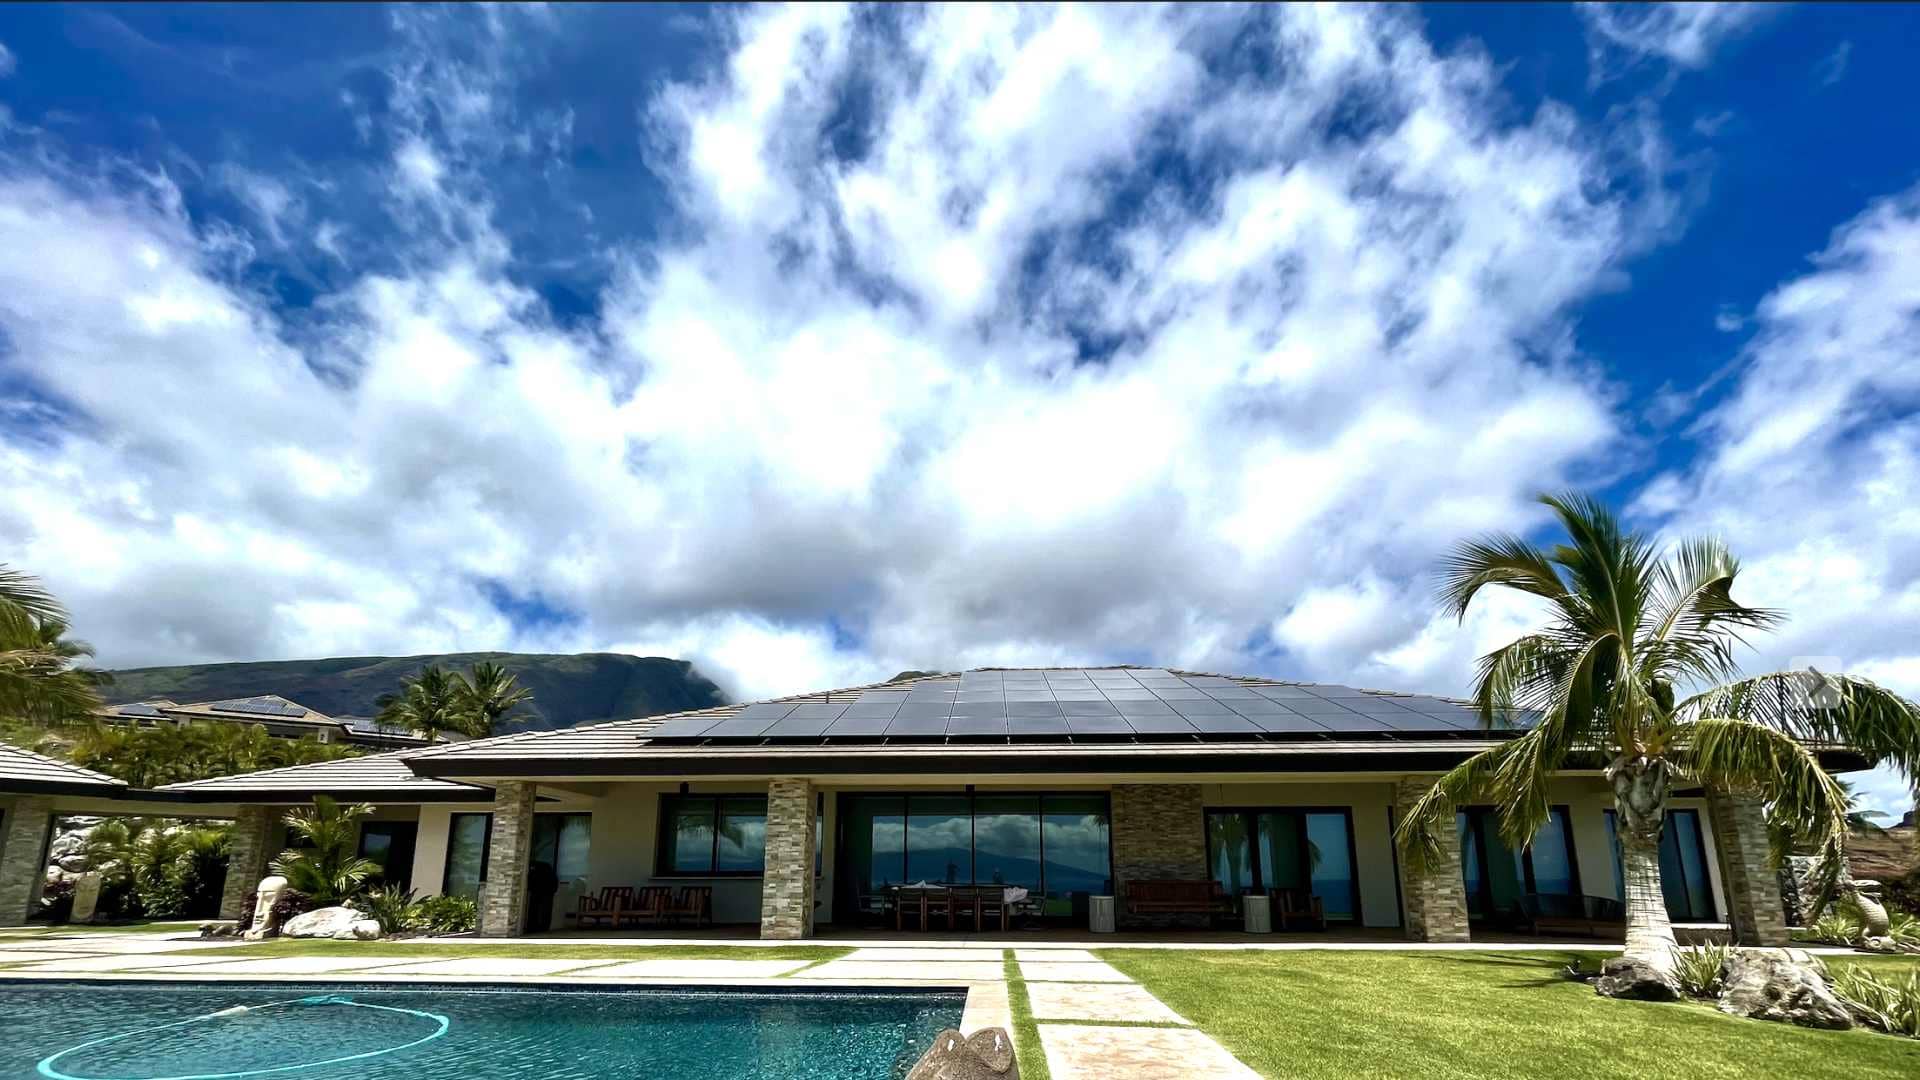 beautiful house with solar roof and pool inside the yard